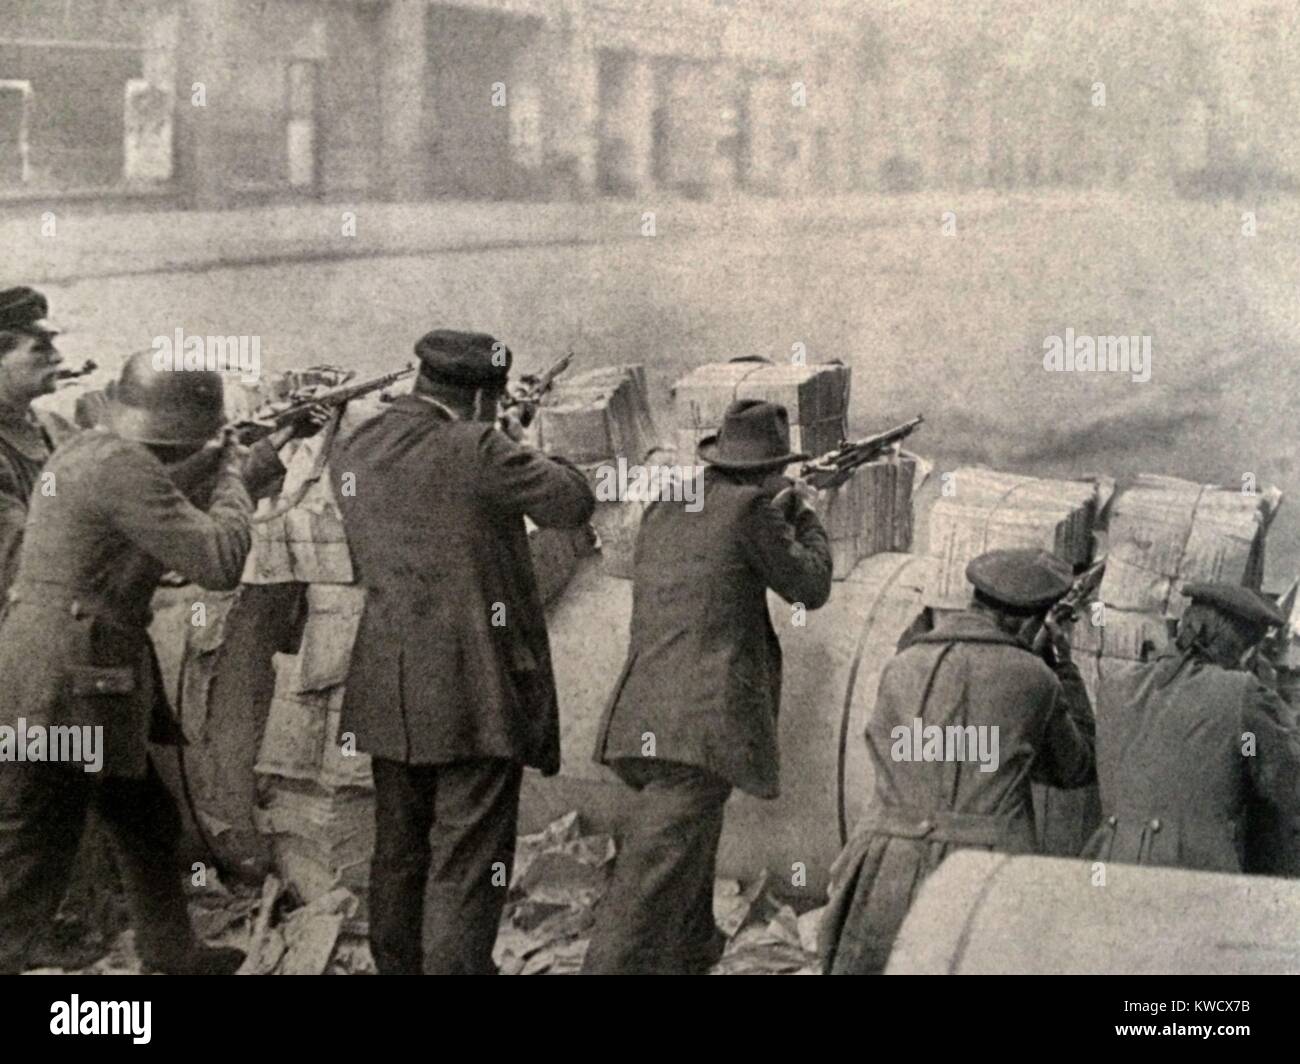 Newspaper barricade during Spartacus Uprising, a phase of the post WW1 German Revolution in Jan. 1919. They were of the Communist Party of Germany, led by Karl Liebknecht (BSLOC 2017 2 53) Stock Photo